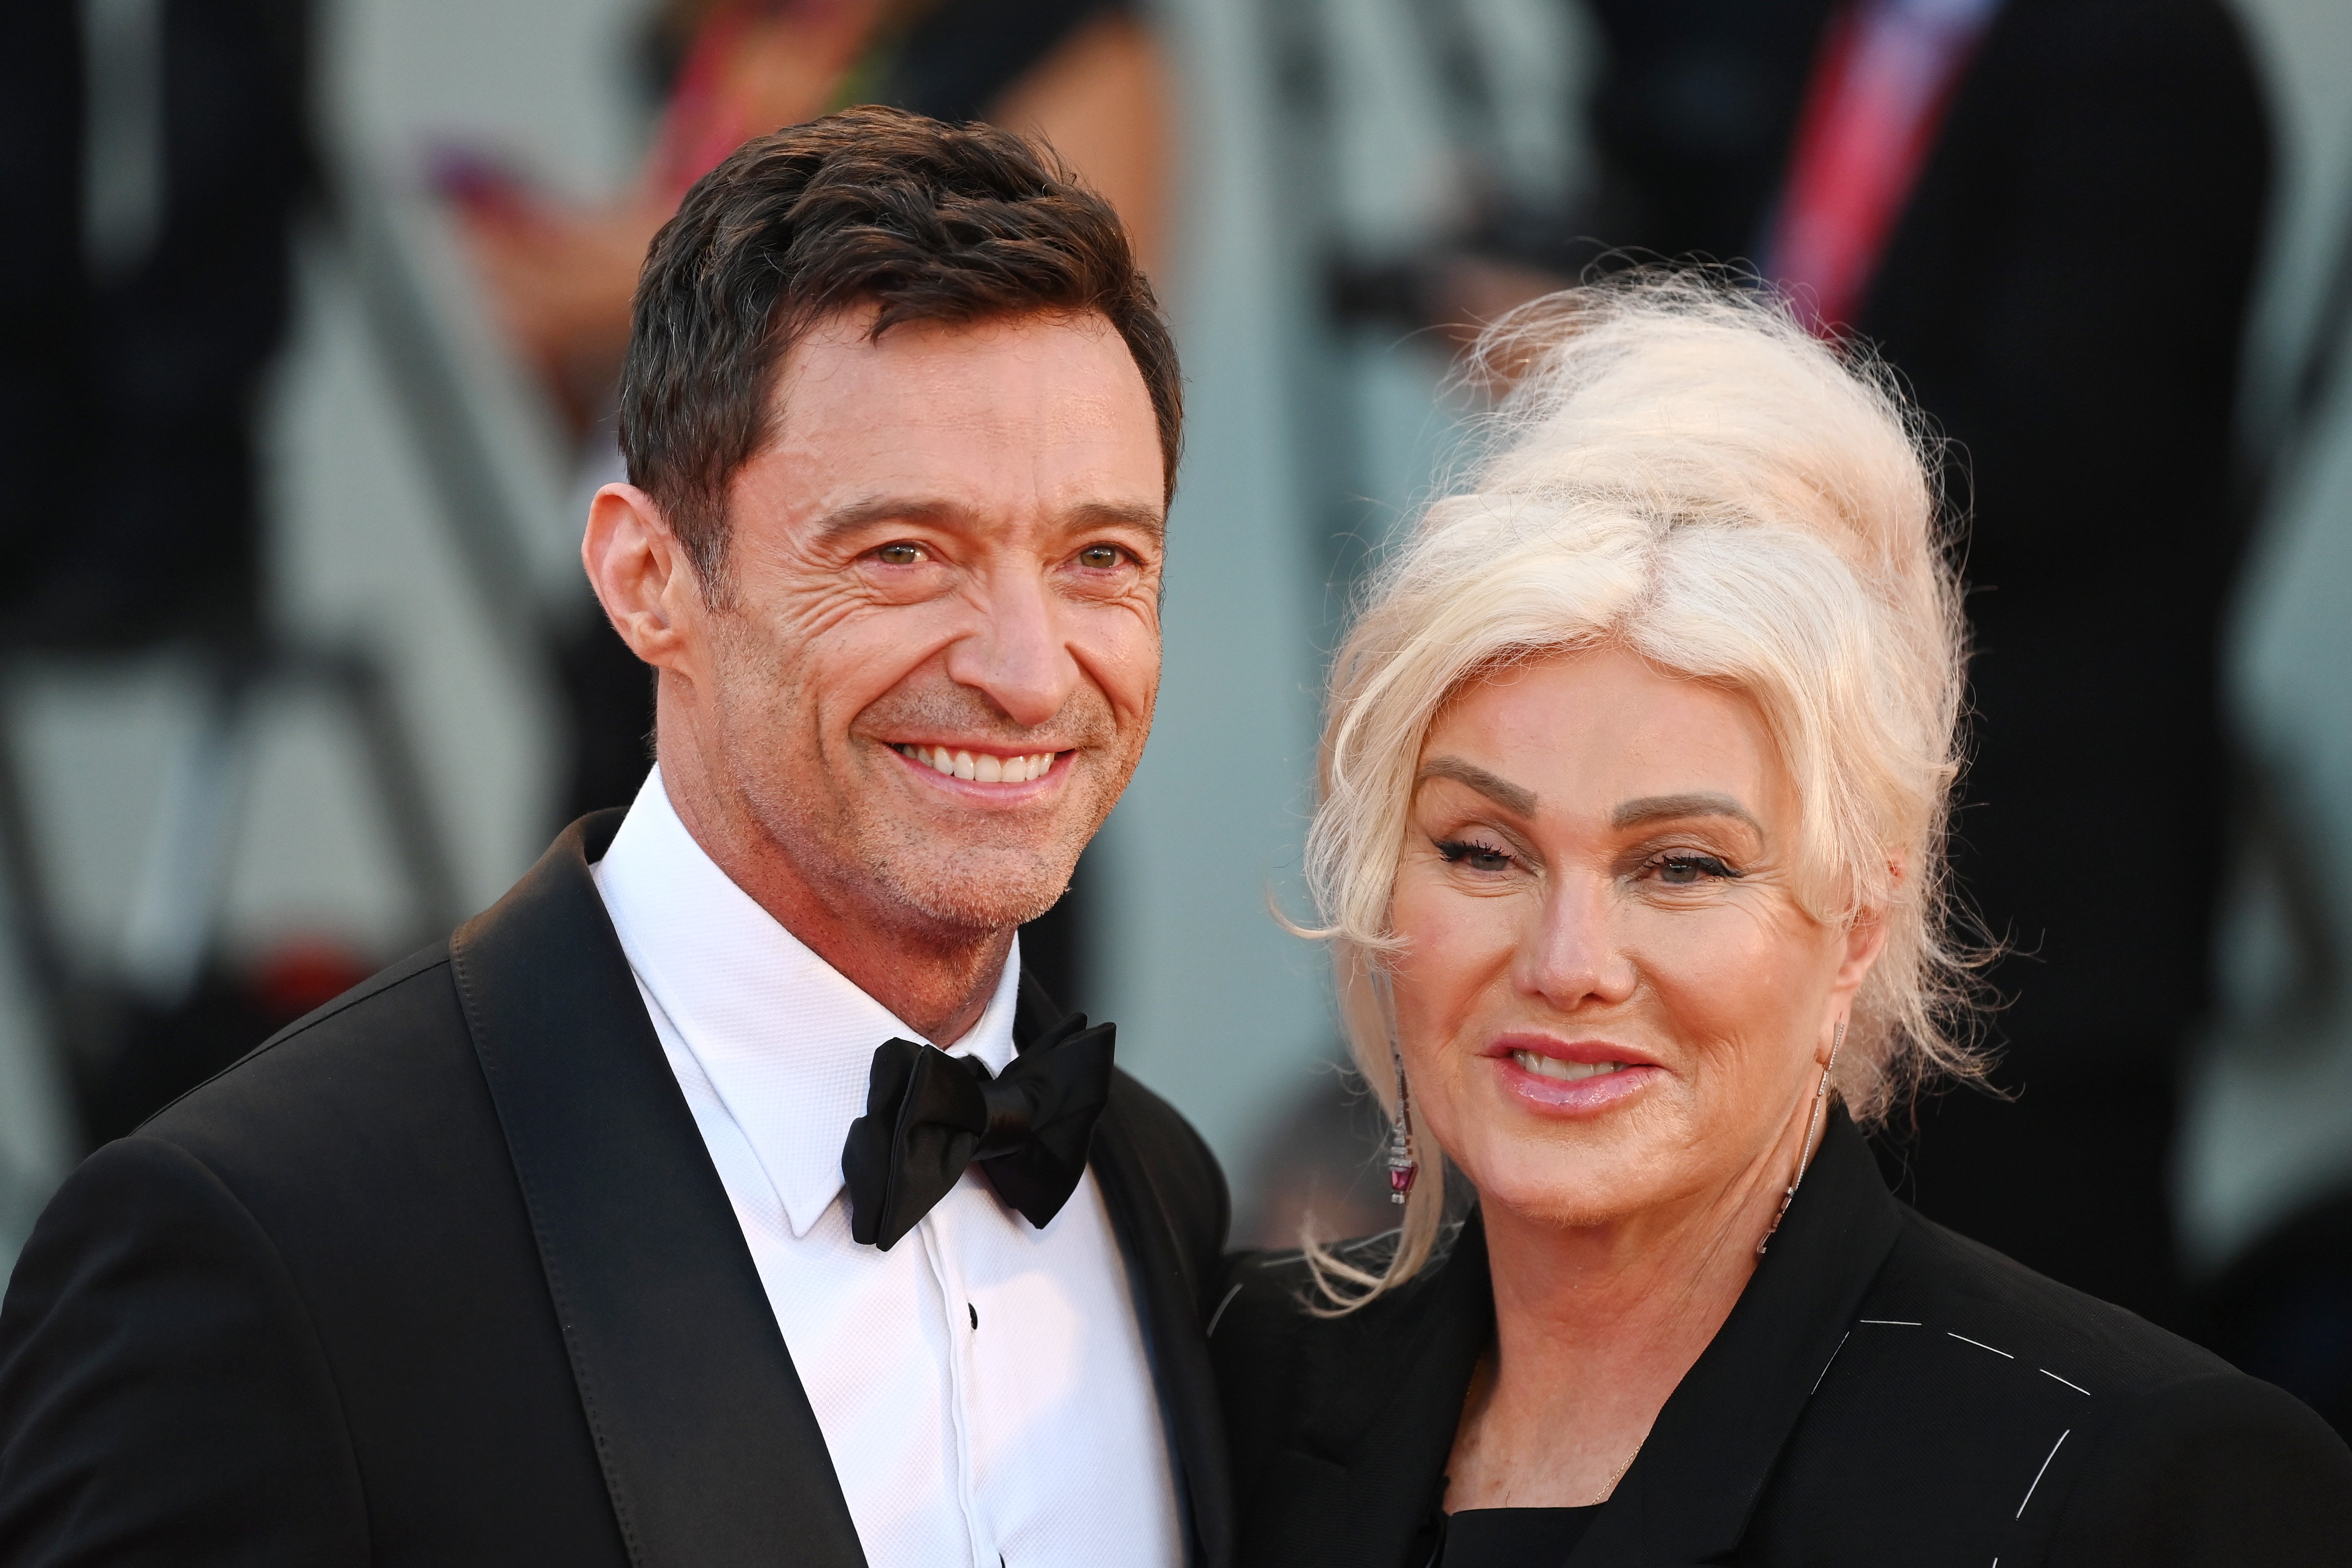 Hugh Jackman and Deborra-Lee Furness at the red carpet for "The Son" at the 79th Venice International Film Festival on September 07, 2022 in Venice, Italy | Source: Getty Images